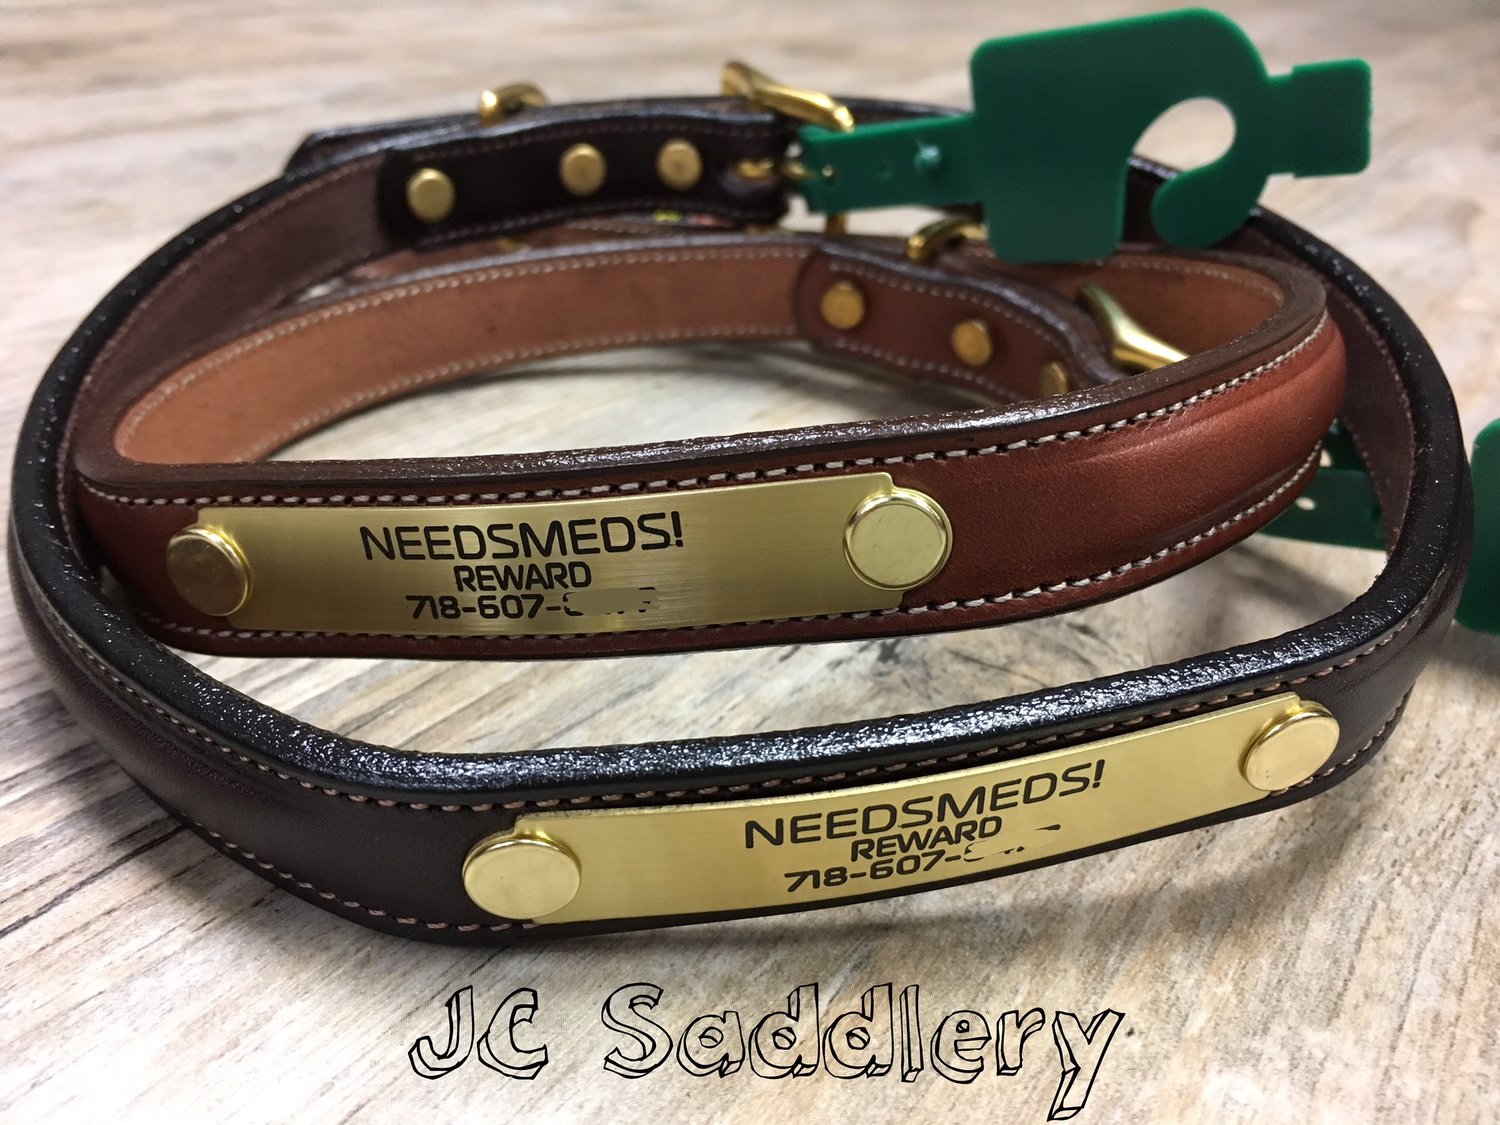 Leather Personalized Dog Collars Custom Pet Name ID Collar Free Engraving   Personalized leather dog collar, Leather dog collars, Dog collar with name